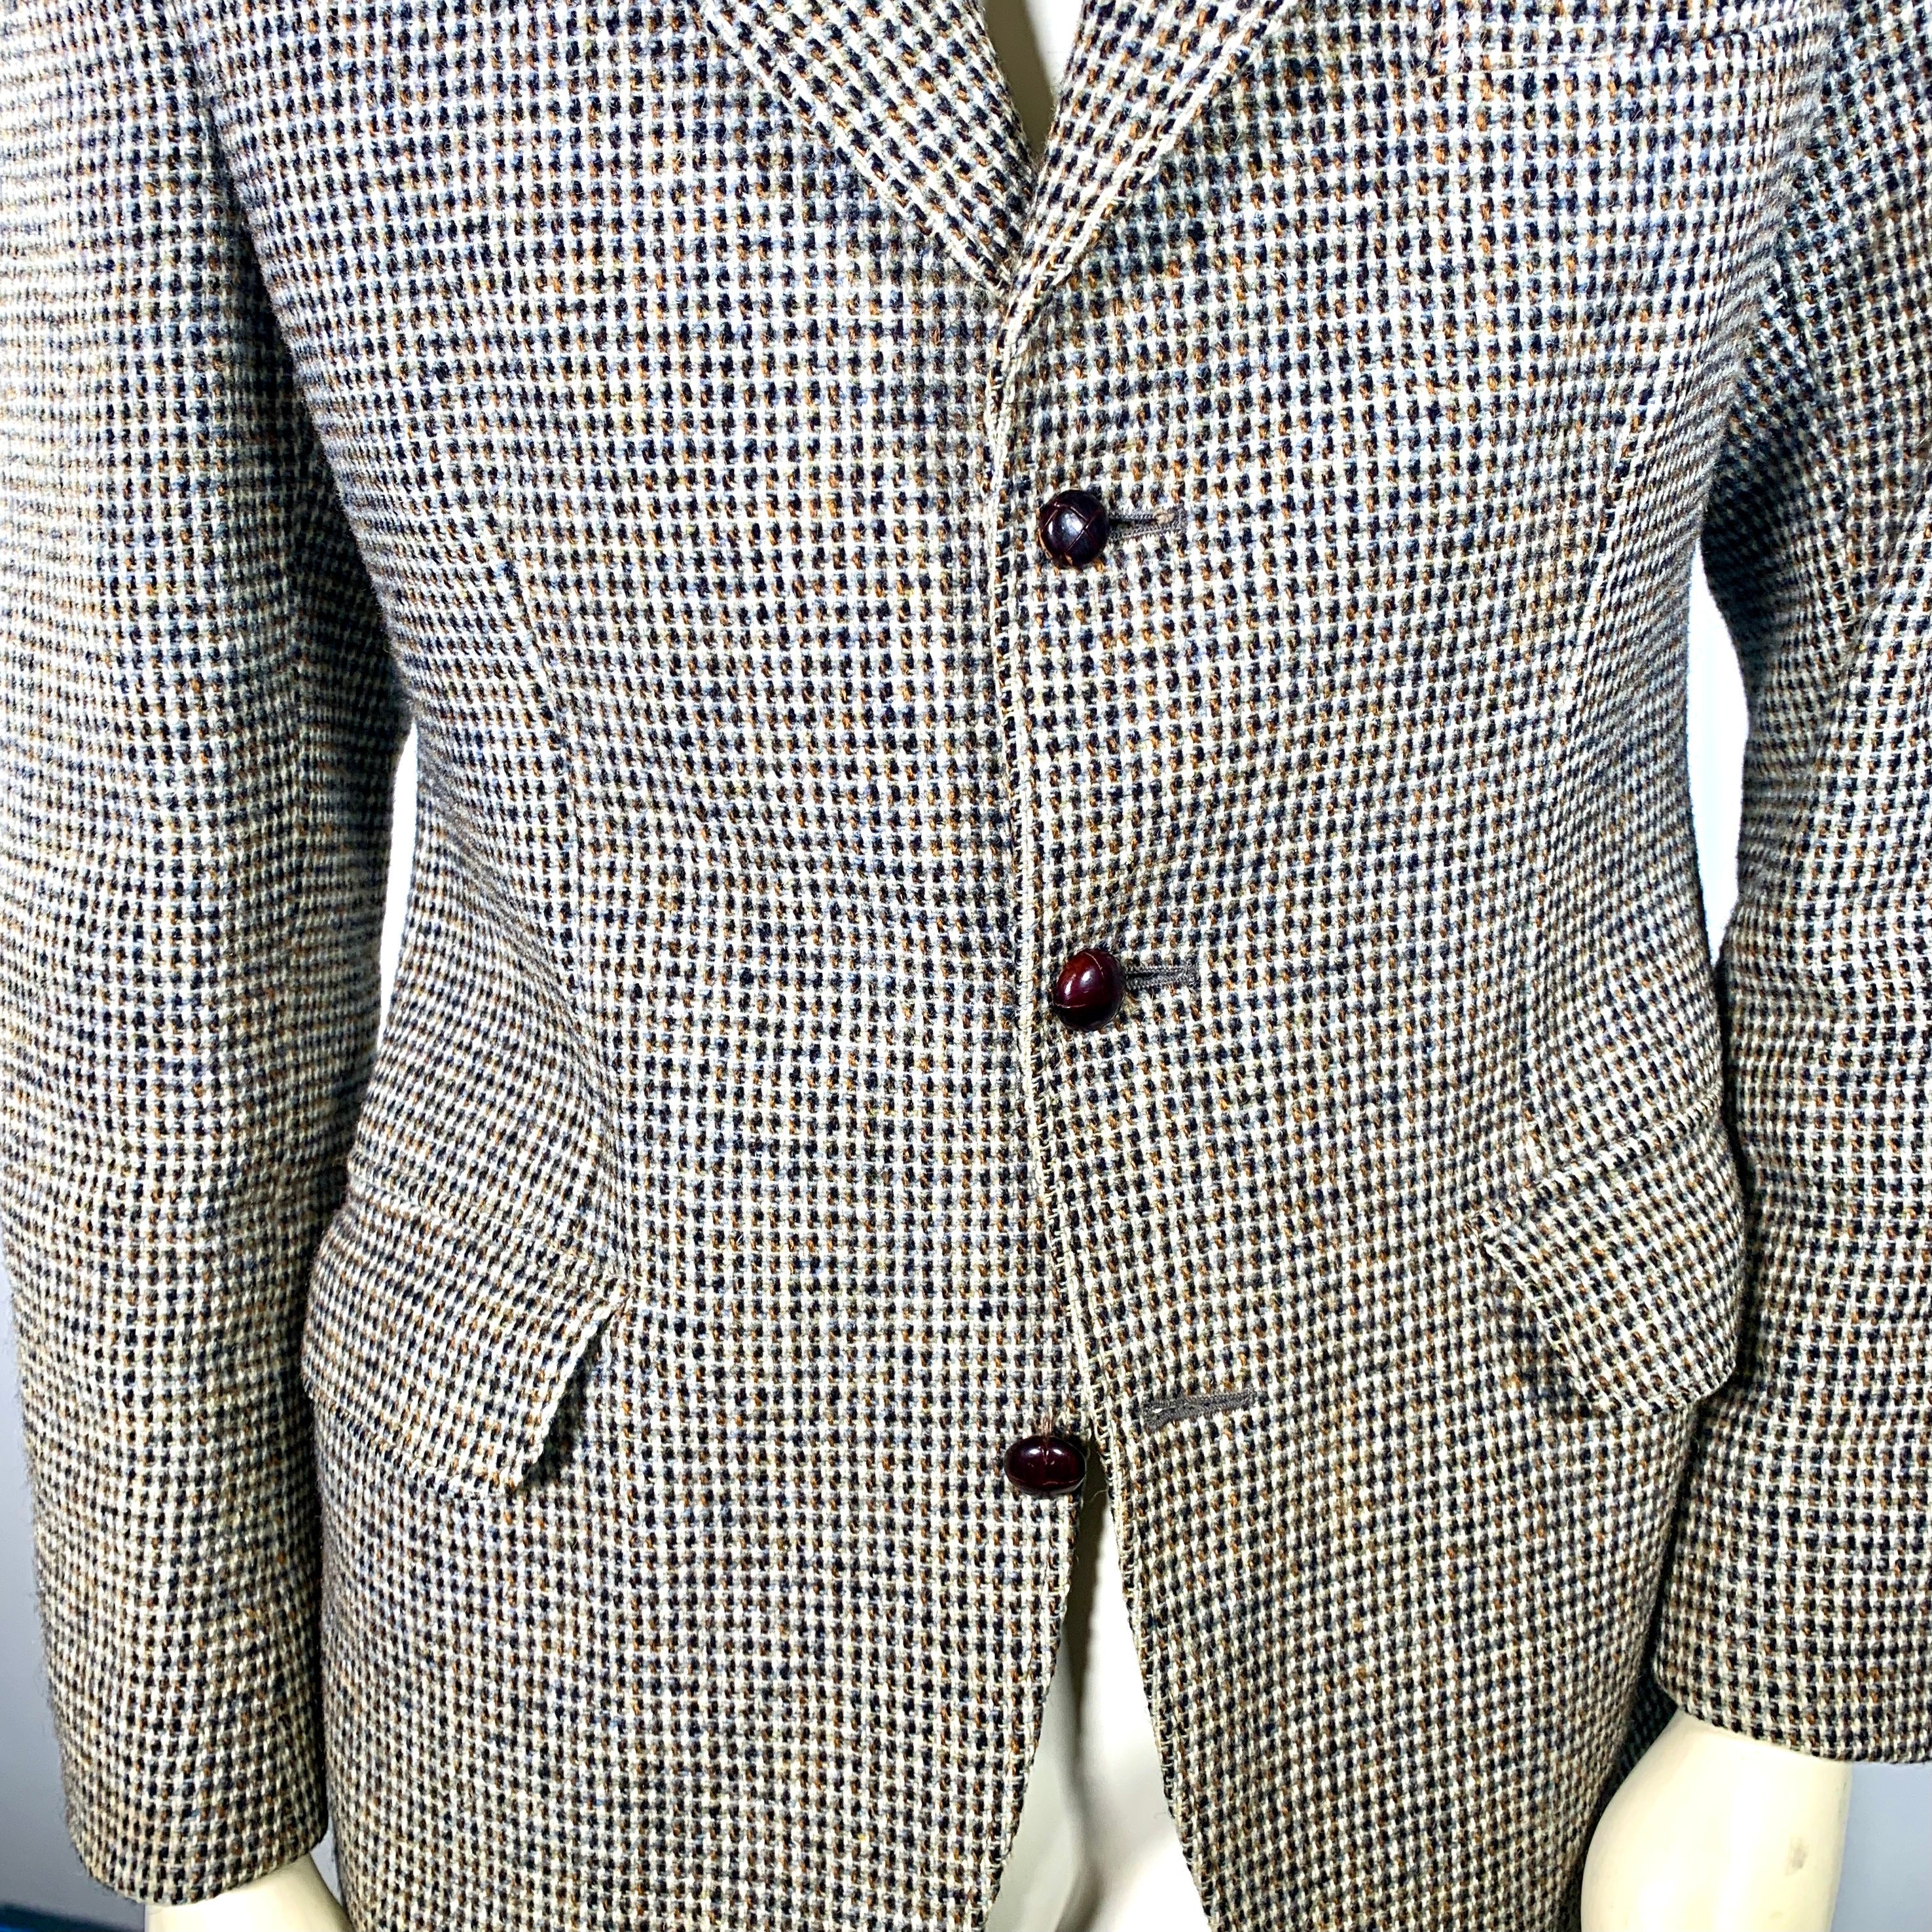 Old School Vintage HARRIS TWEED 3 Button Check Hacking or Sports